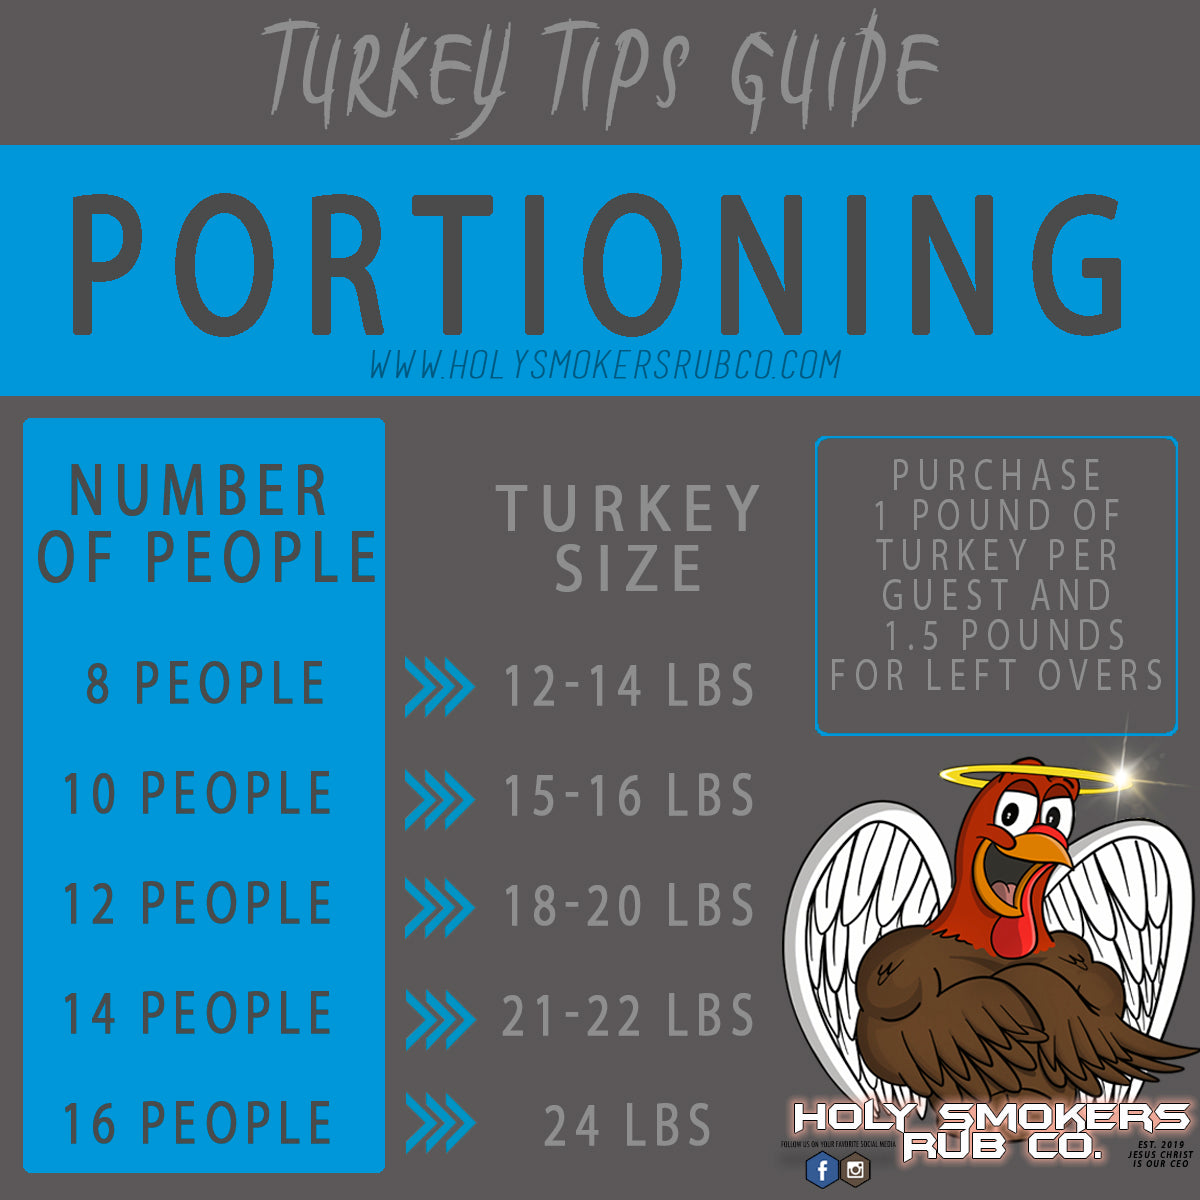 Turkey Portions guide by holy smokers rub co